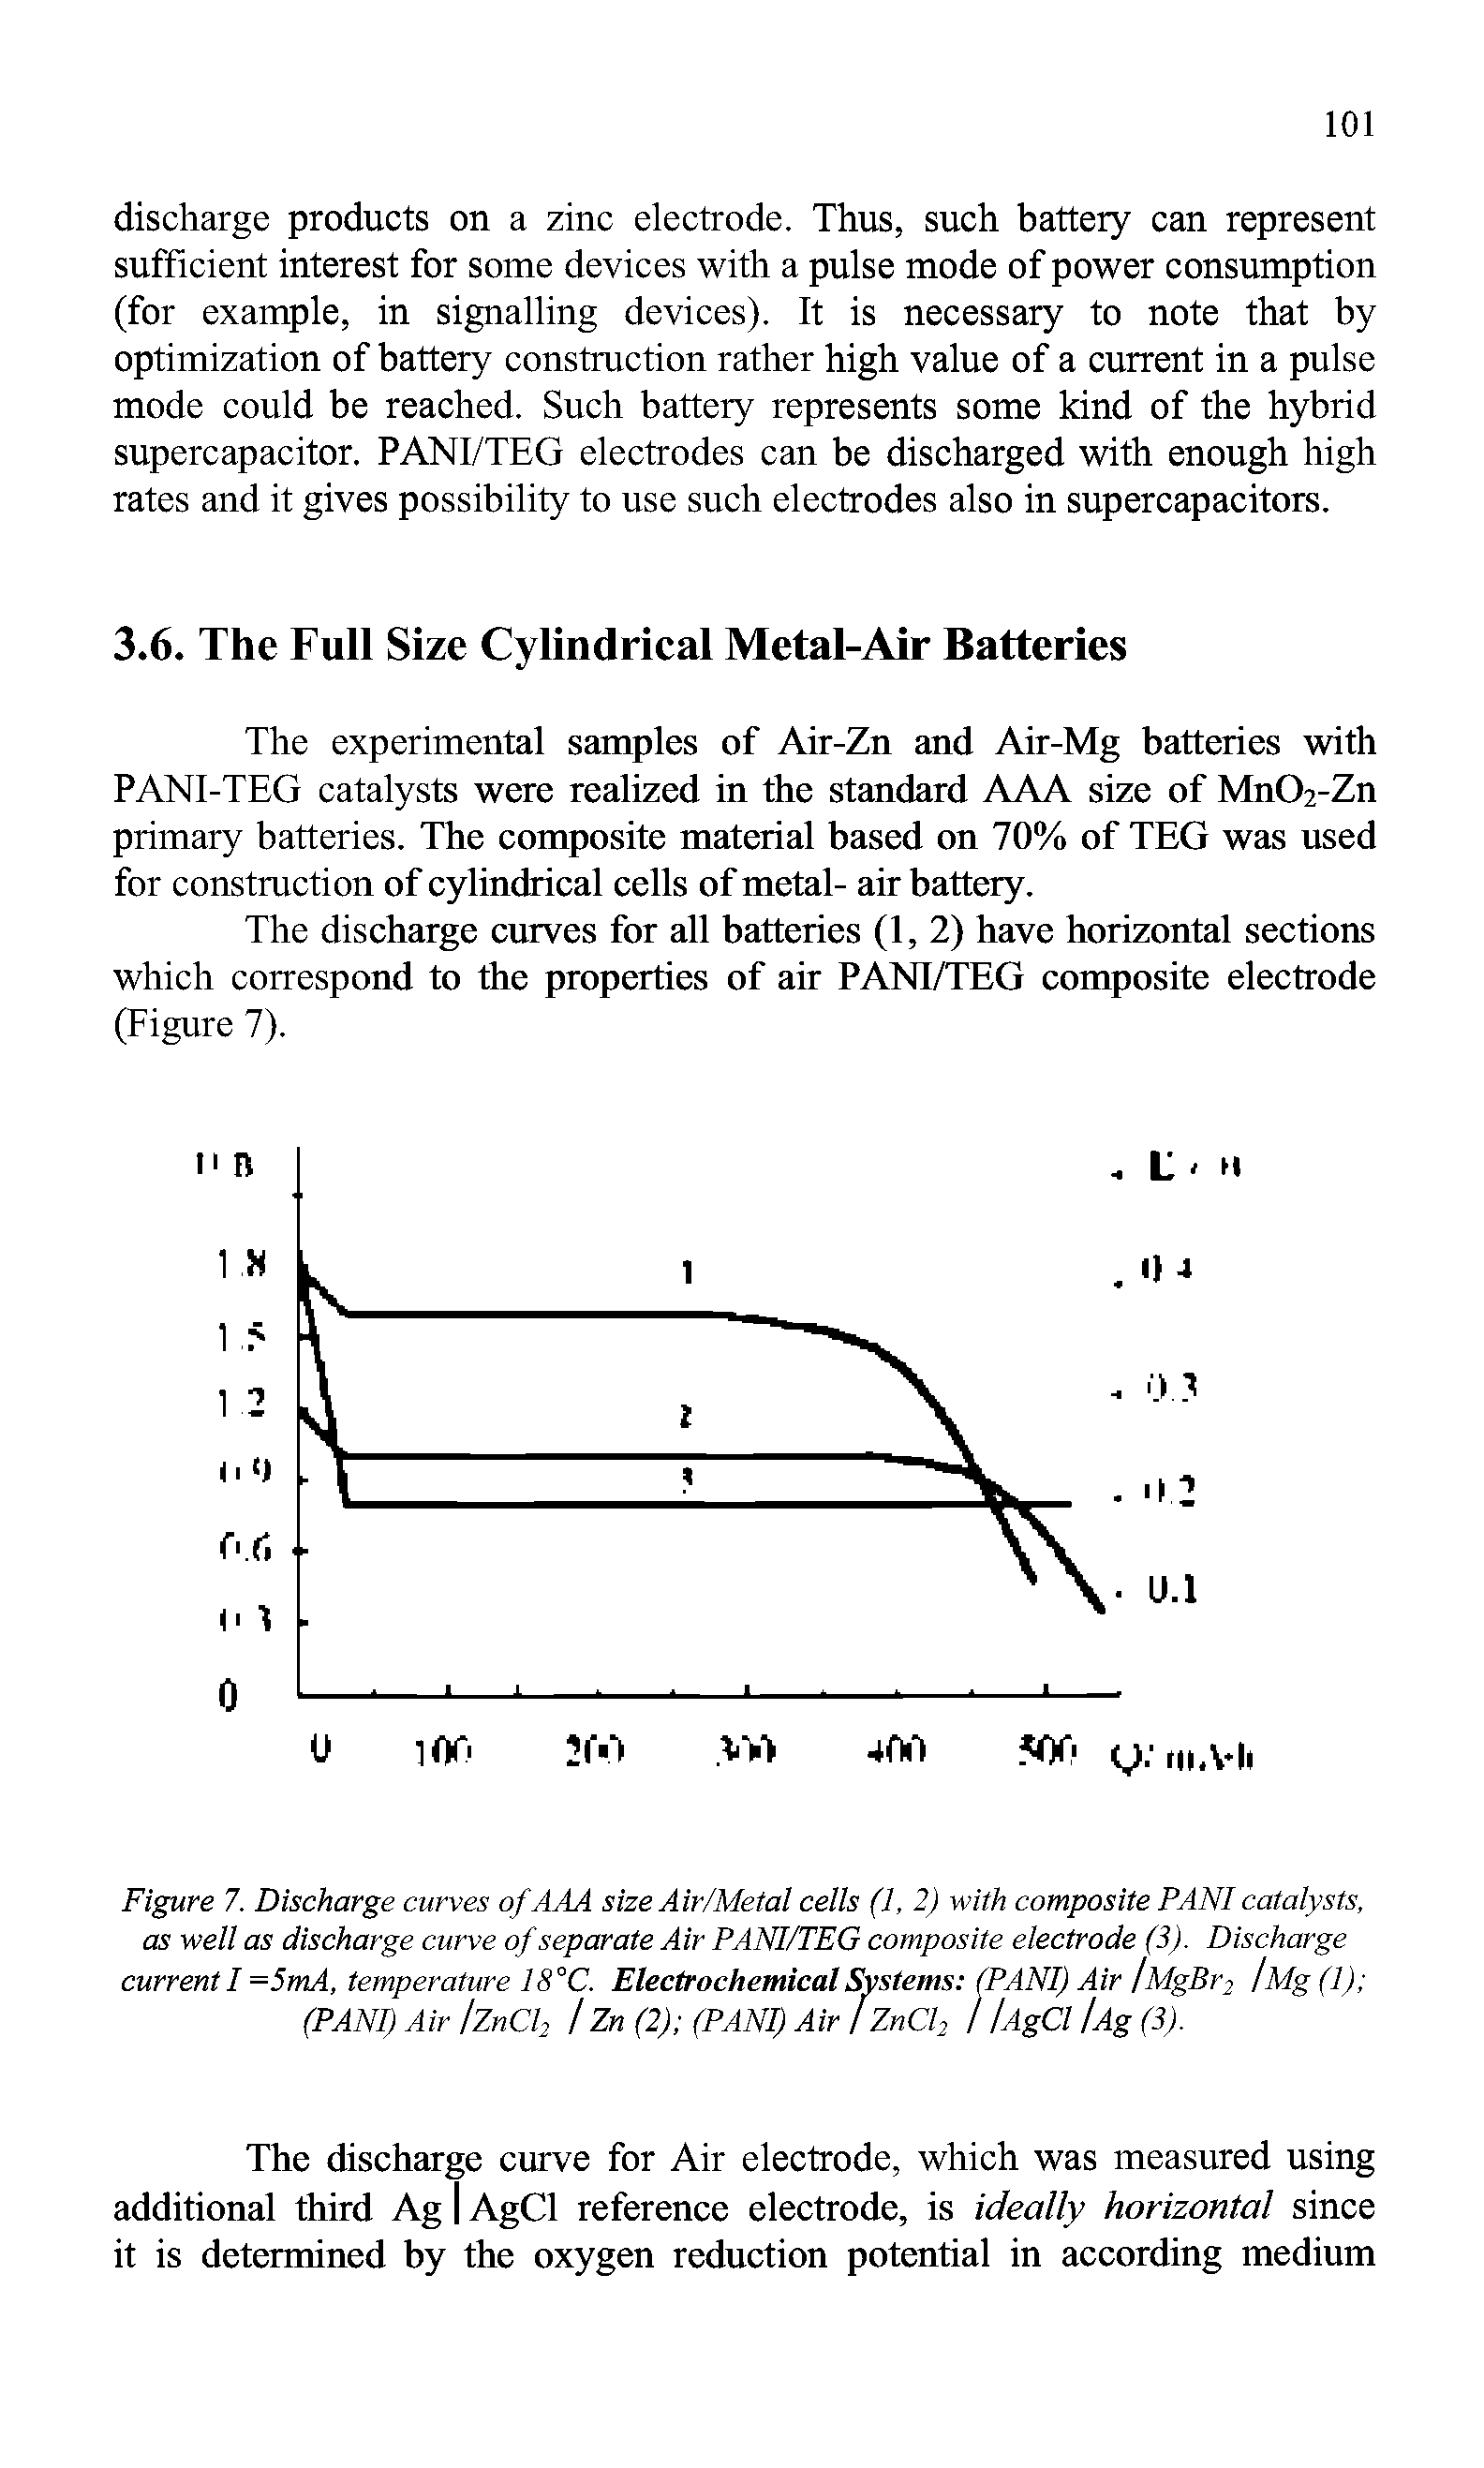 Figure 7. Discharge curves of AAA size Air/Metal cells (1, 2) with composite PANI catalysts, as well as discharge curve of separate Air PANI/TEG composite electrode (3). Discharge current I =5mA, temperature 18°C. Electrochemical Systems (PANI) Air /MgBr2 I Mg (1) (PANI) Air IZnCl2 /Zn (2) (PANI) Air / ZnCl2 1 UgCl Ug (3).